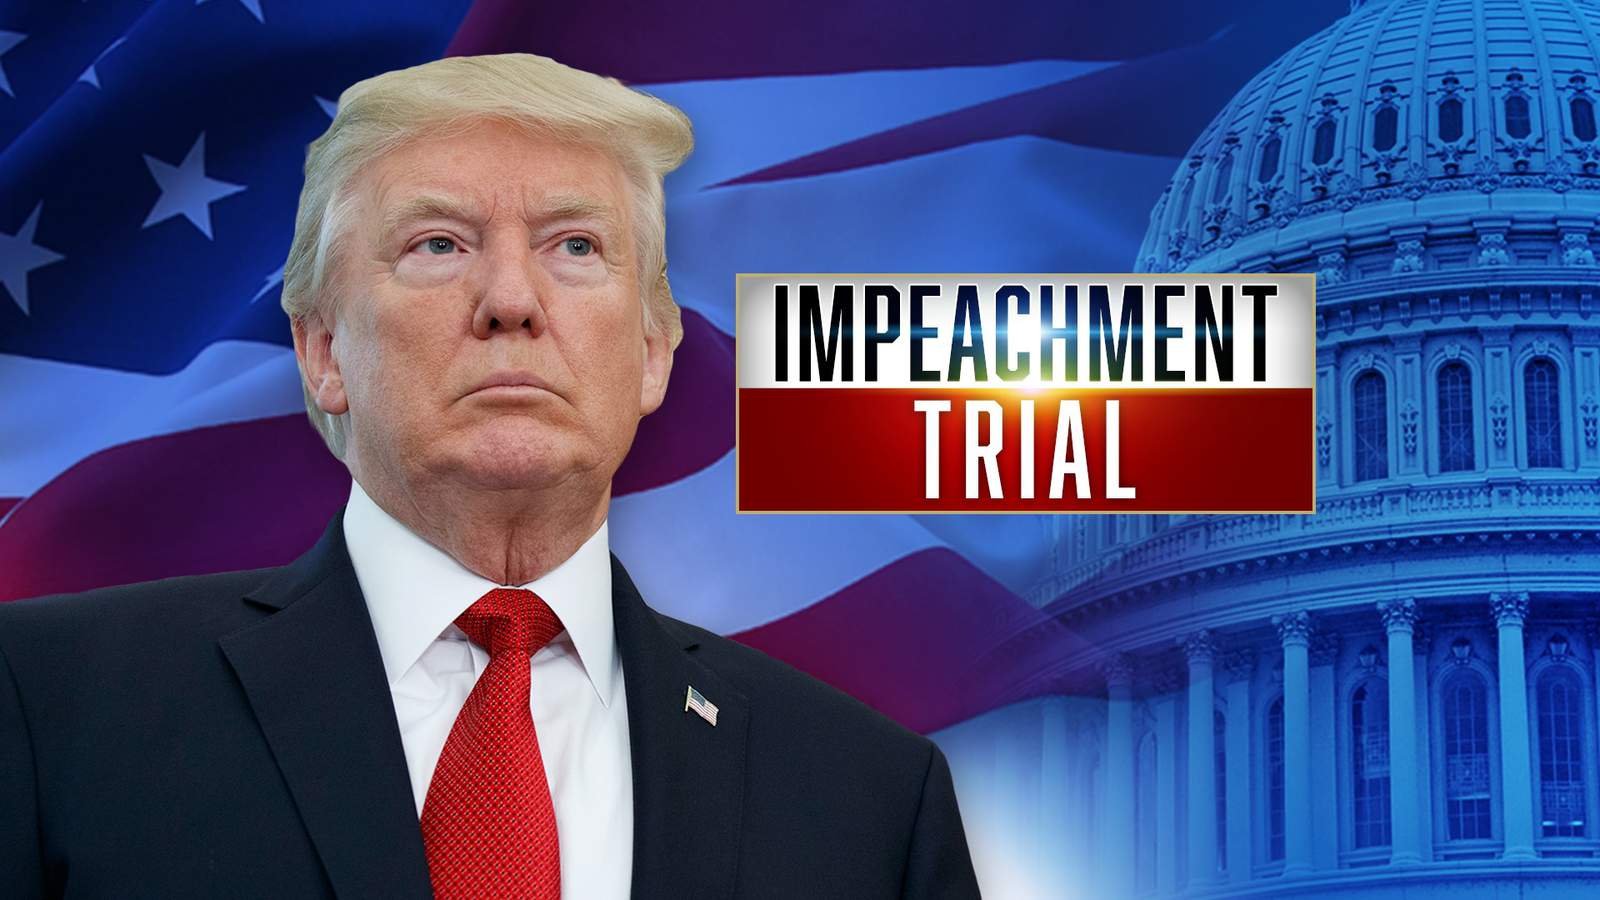 Senate votes to allow Trump’s second impeachment trial to proceed